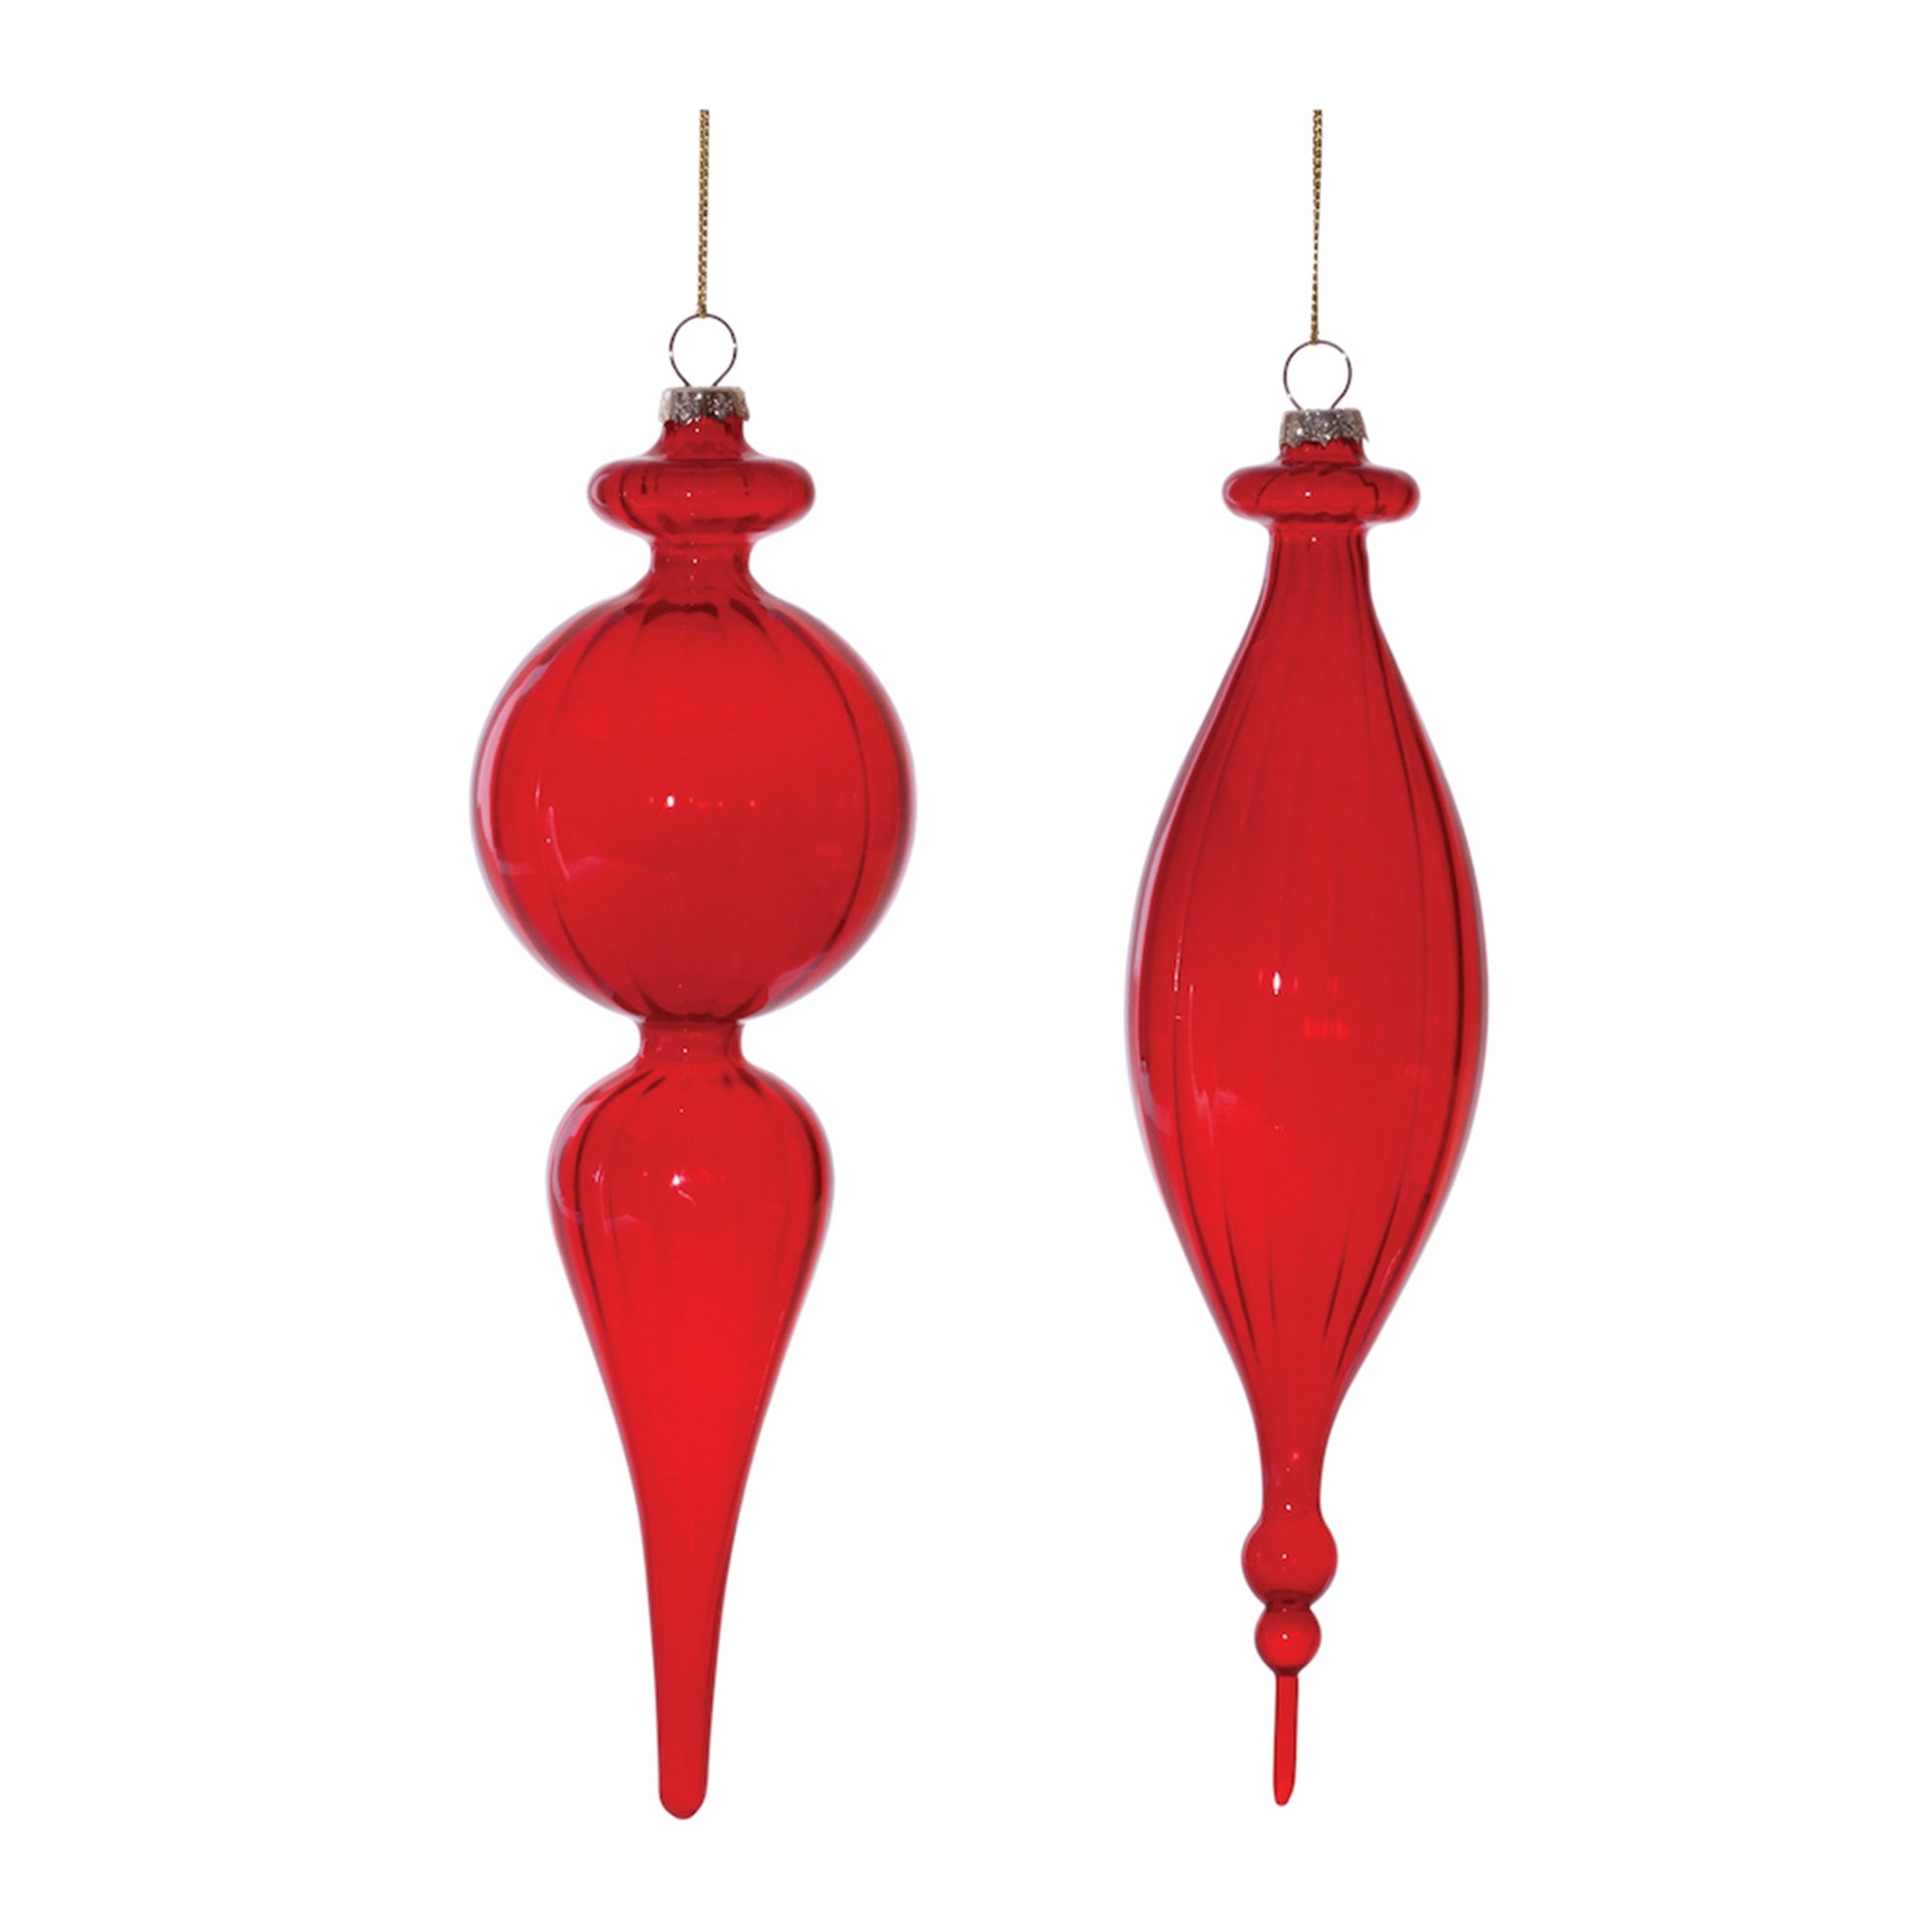 Red Ribbed Glass Finial Drop Ornament (Set of 6)